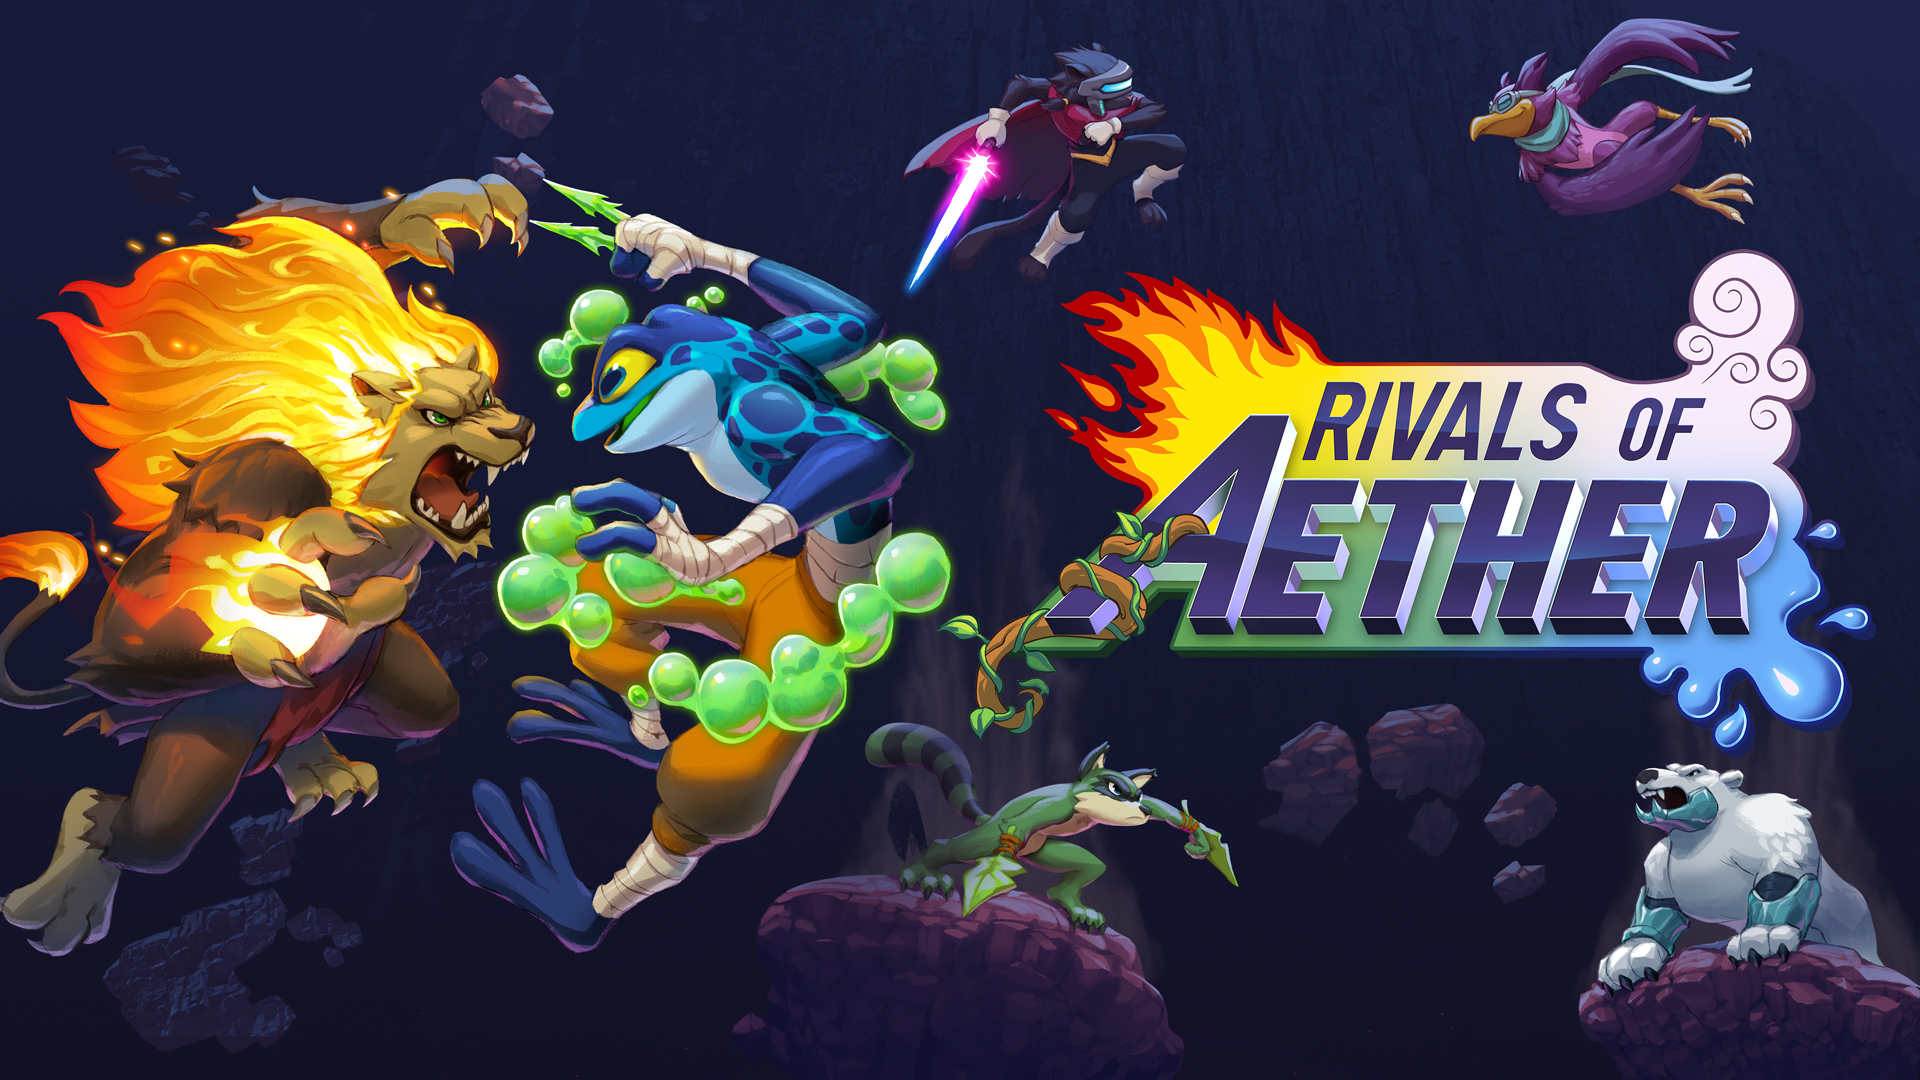 Rivals of Aether/Nintendo Switch/eShop Download.